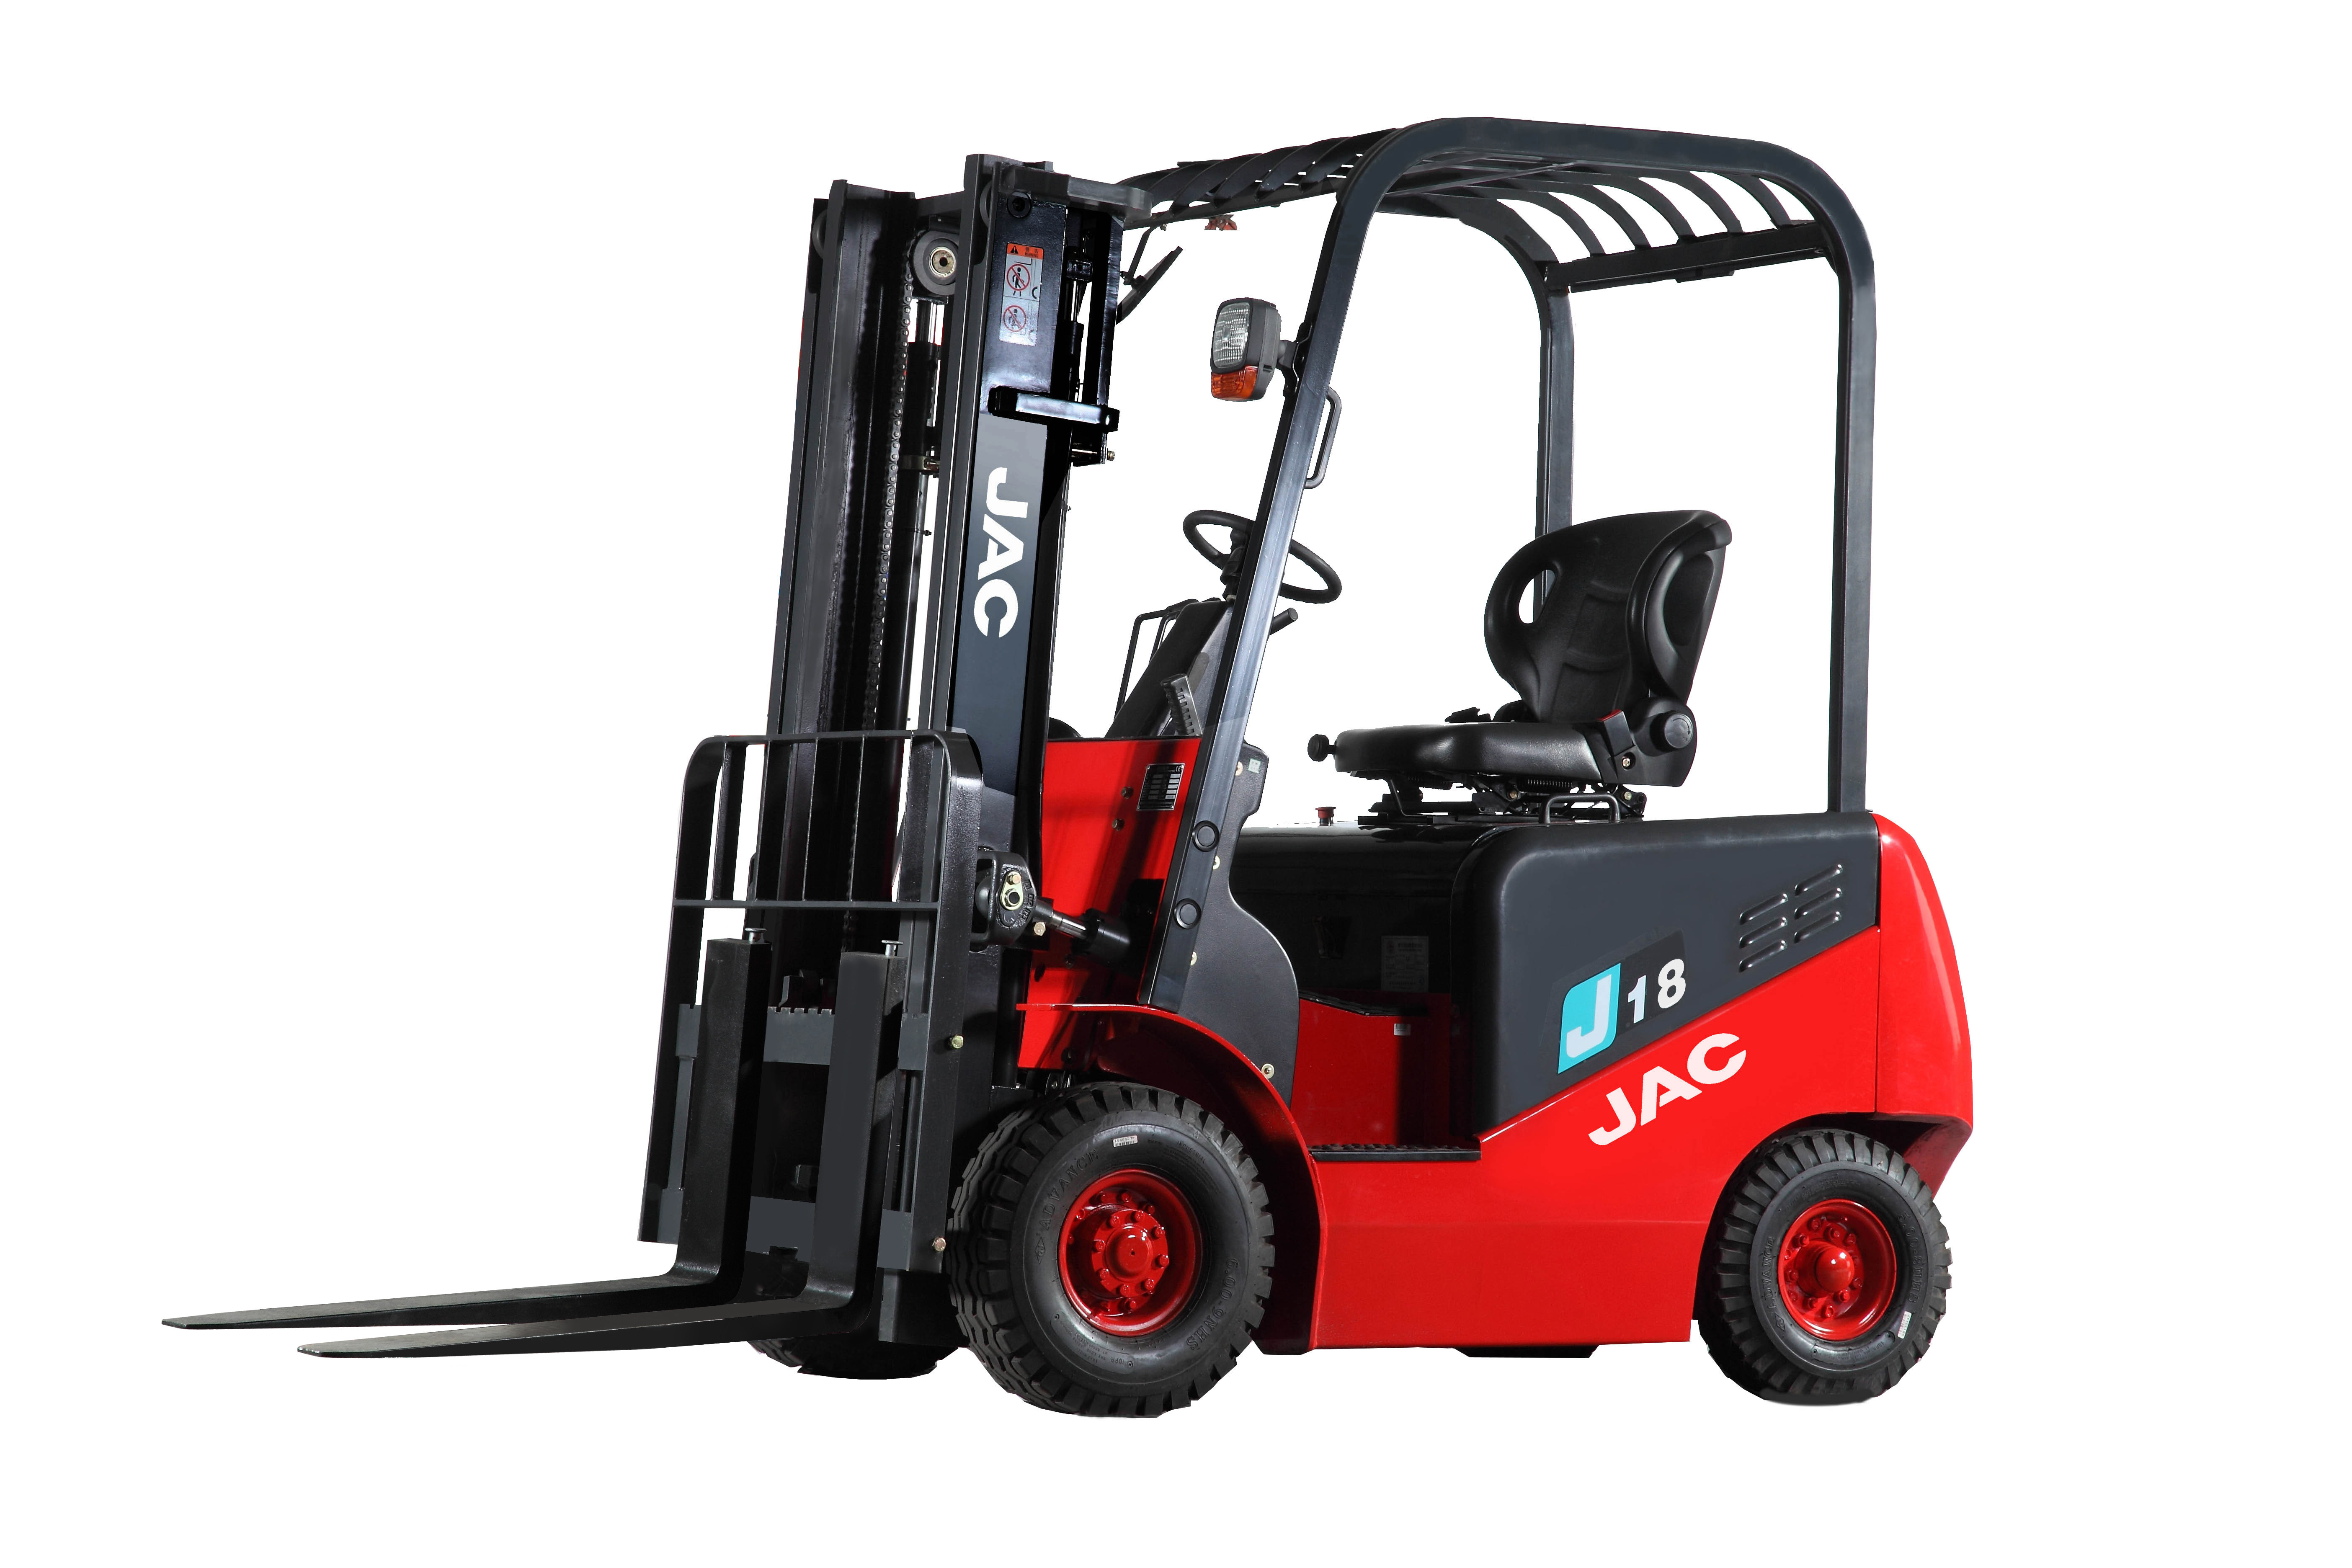  Counterbalance Electric Forklift Truck 1.8 Ton Capacity With AC Power System Manufactures